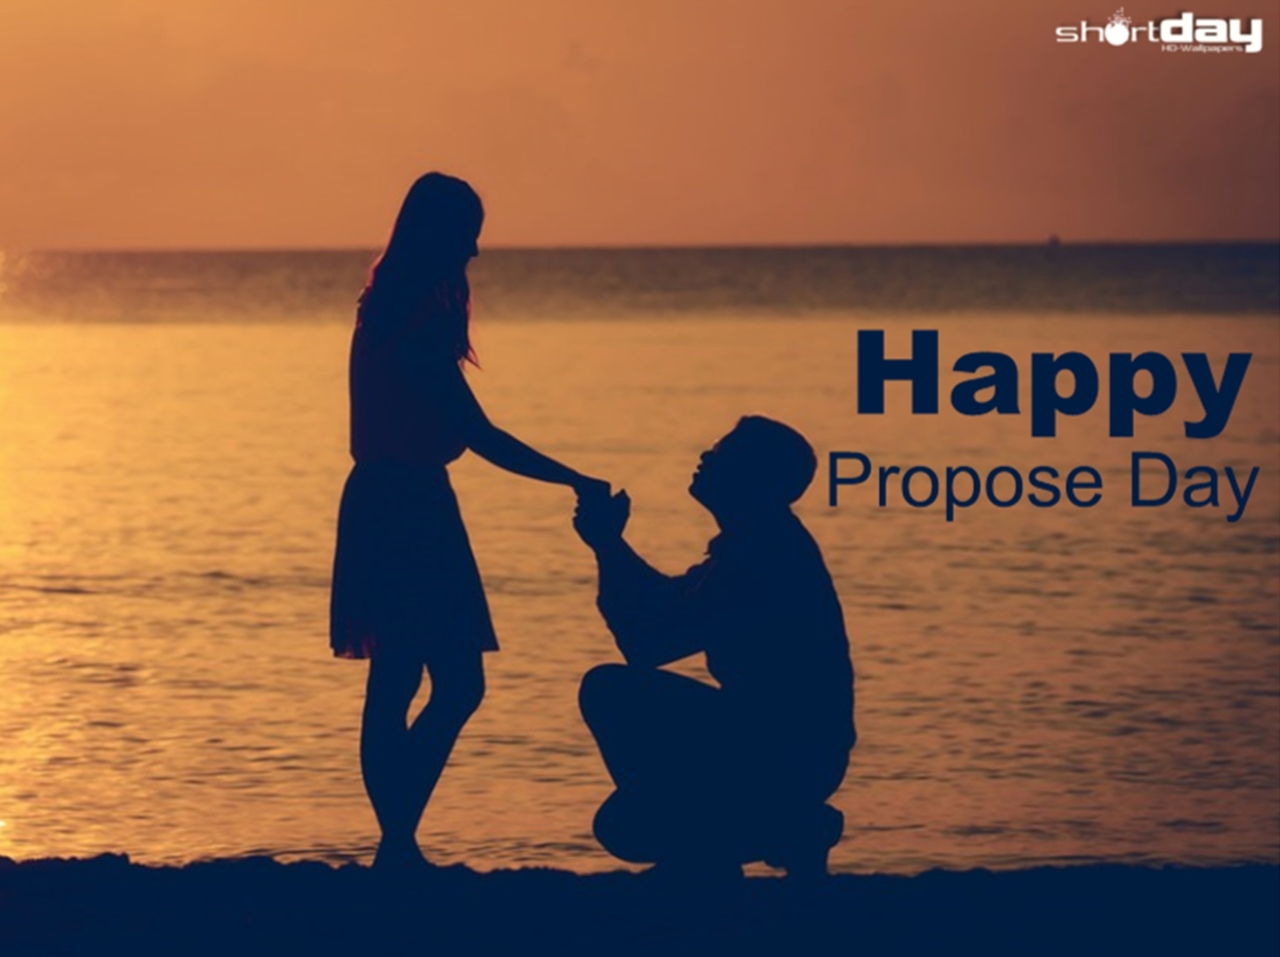 Happy Propose Day HD Wallpaper